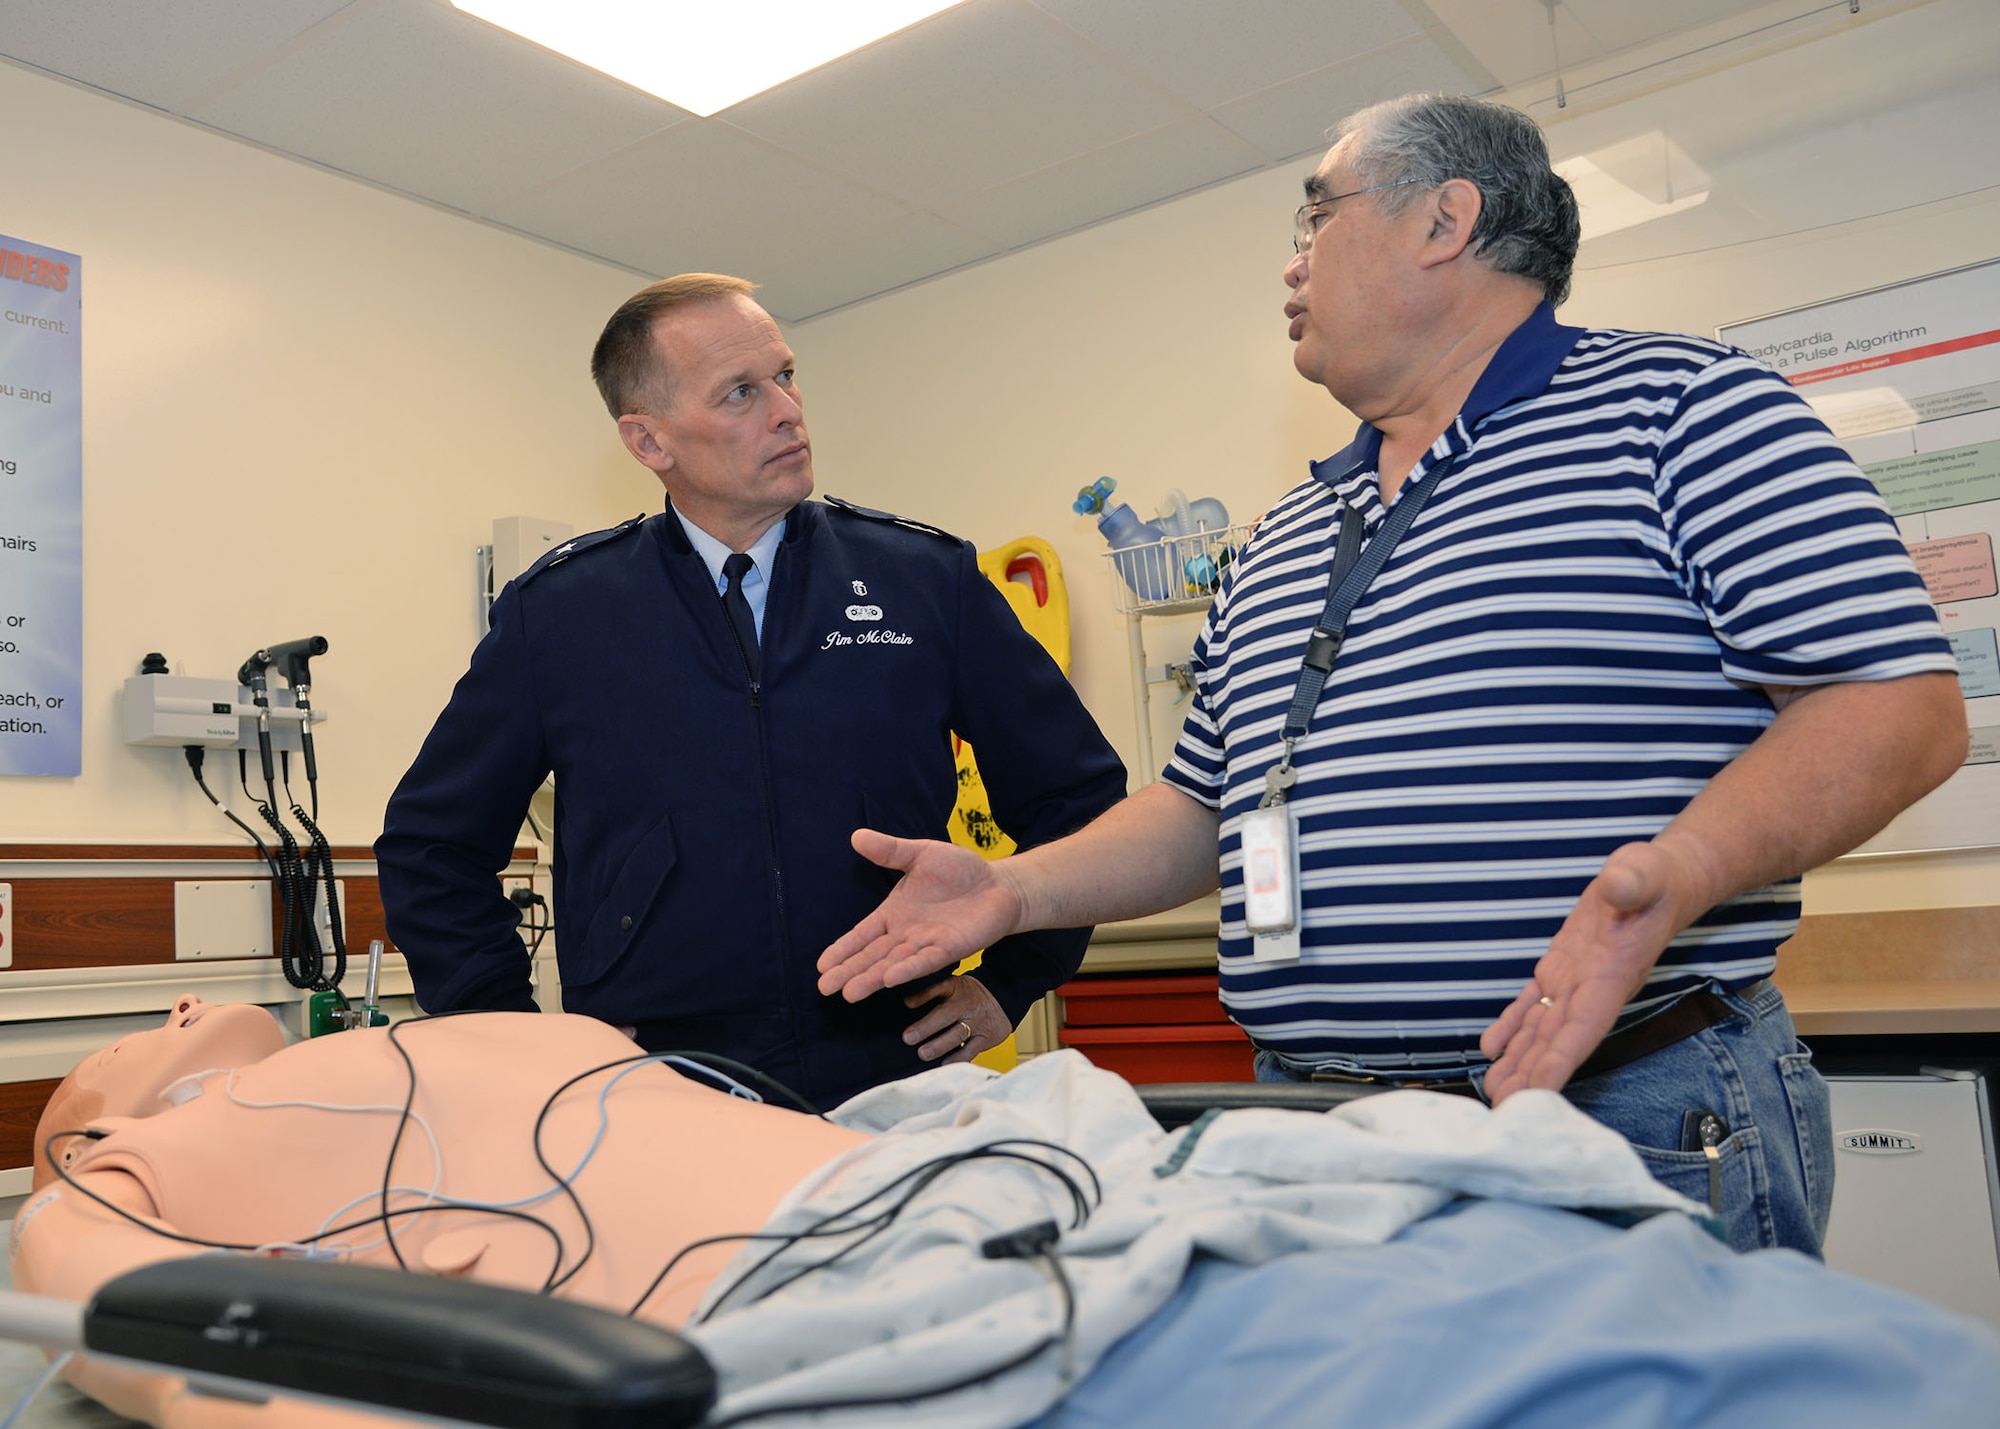 Thomas Kai, Graduate Medical Education coordinator for simulation, explains to Brig. Gen. James McClain, Air Force Medical Support Agency commander, the advanced capabilities of simulation training dummies and scenarios that are available to students at the San Antonio Military Medical Center, Joint Base San Antonio-Fort Sam Houston, Texas, Dec. 8, 2014. McClain served as keynote speaker during the San Antonio Uniformed Services Health Education Consortium Winter Commencement, and then toured 59th Medical Wing Biomedical Service Corps areas at both SAMMC and the Wilford Hall Ambulatory Surgical Center on JBSA-Lackland. (U.S. Air Force photo/Staff Sgt. Christopher Carwile)